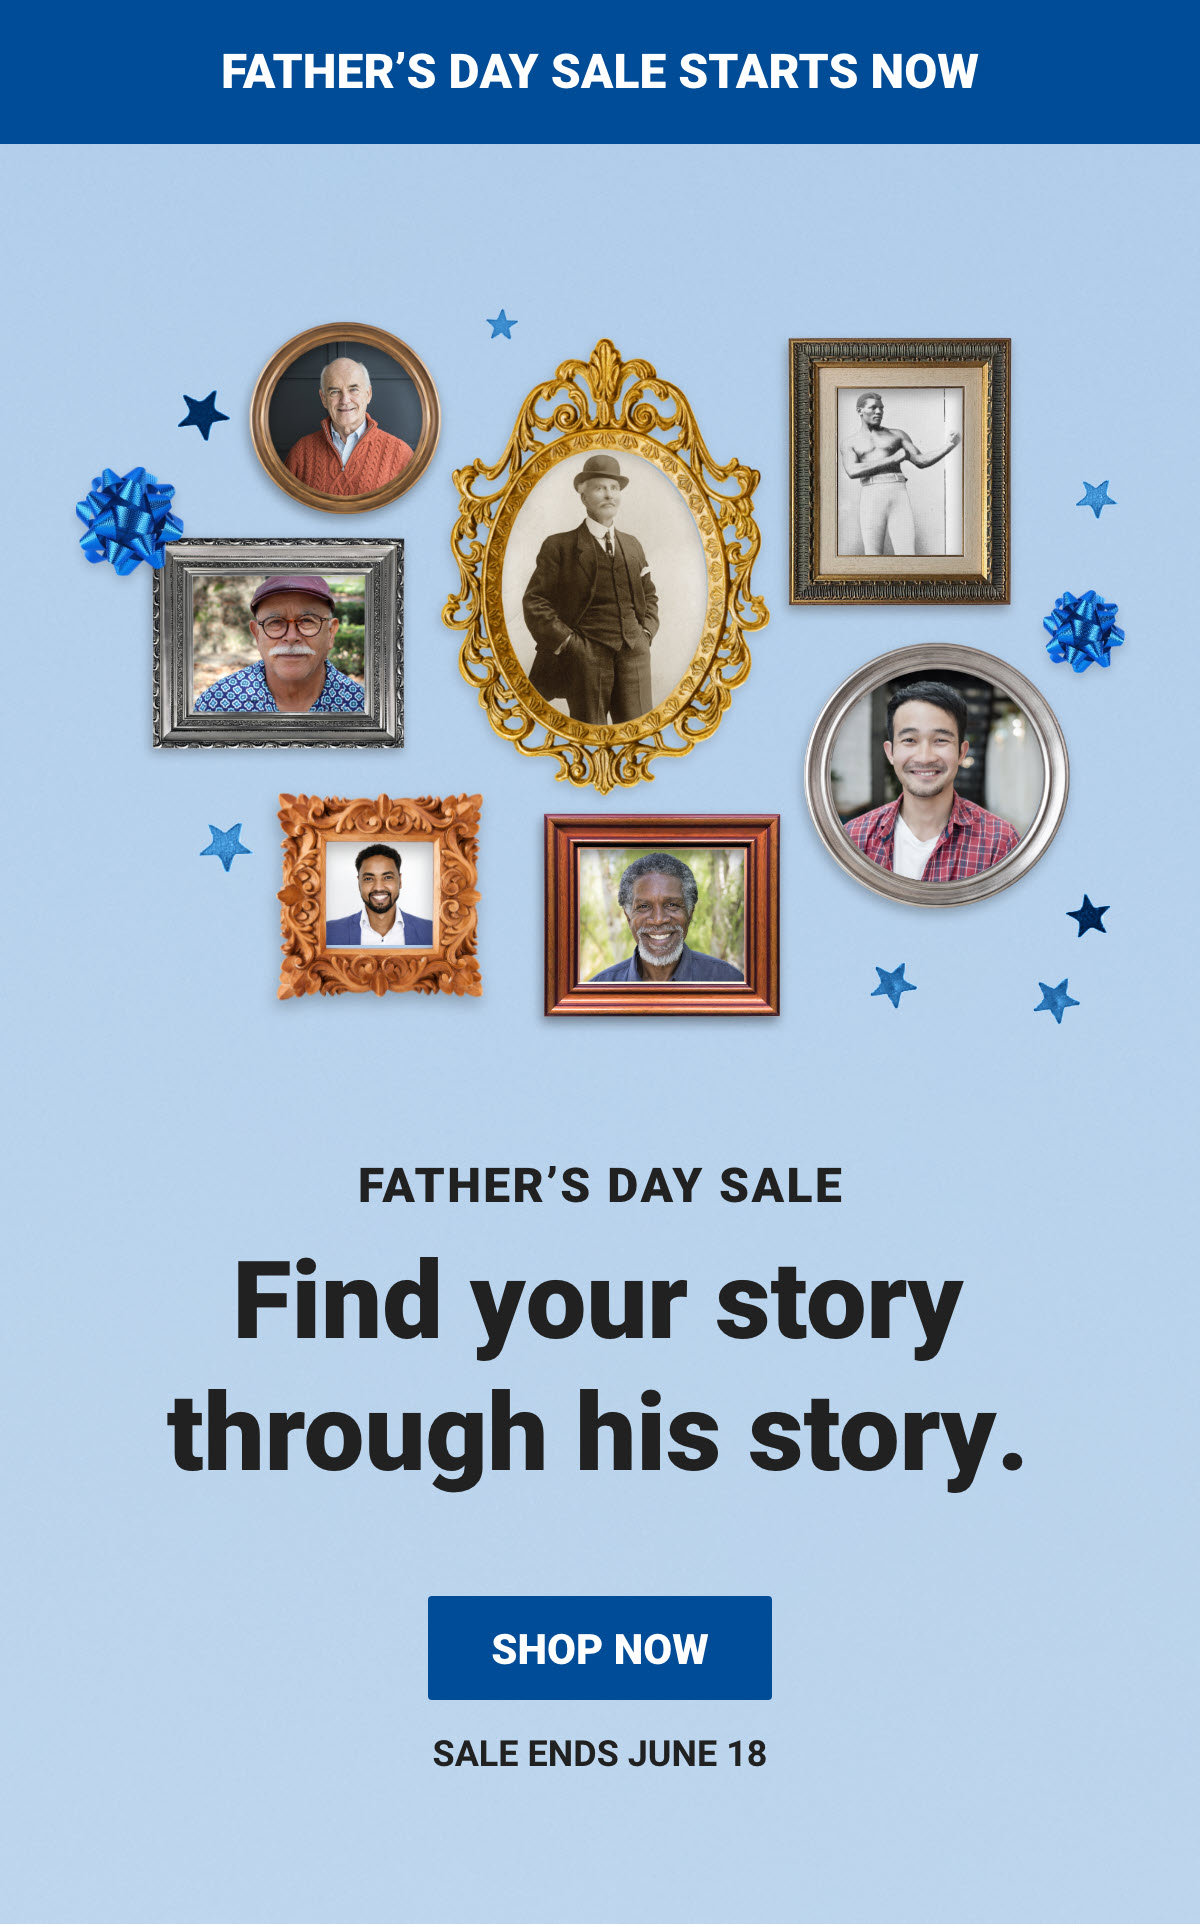 FamilyTreeDNA Father's Day Sale valid through Sunday, June 18th - don't delay!